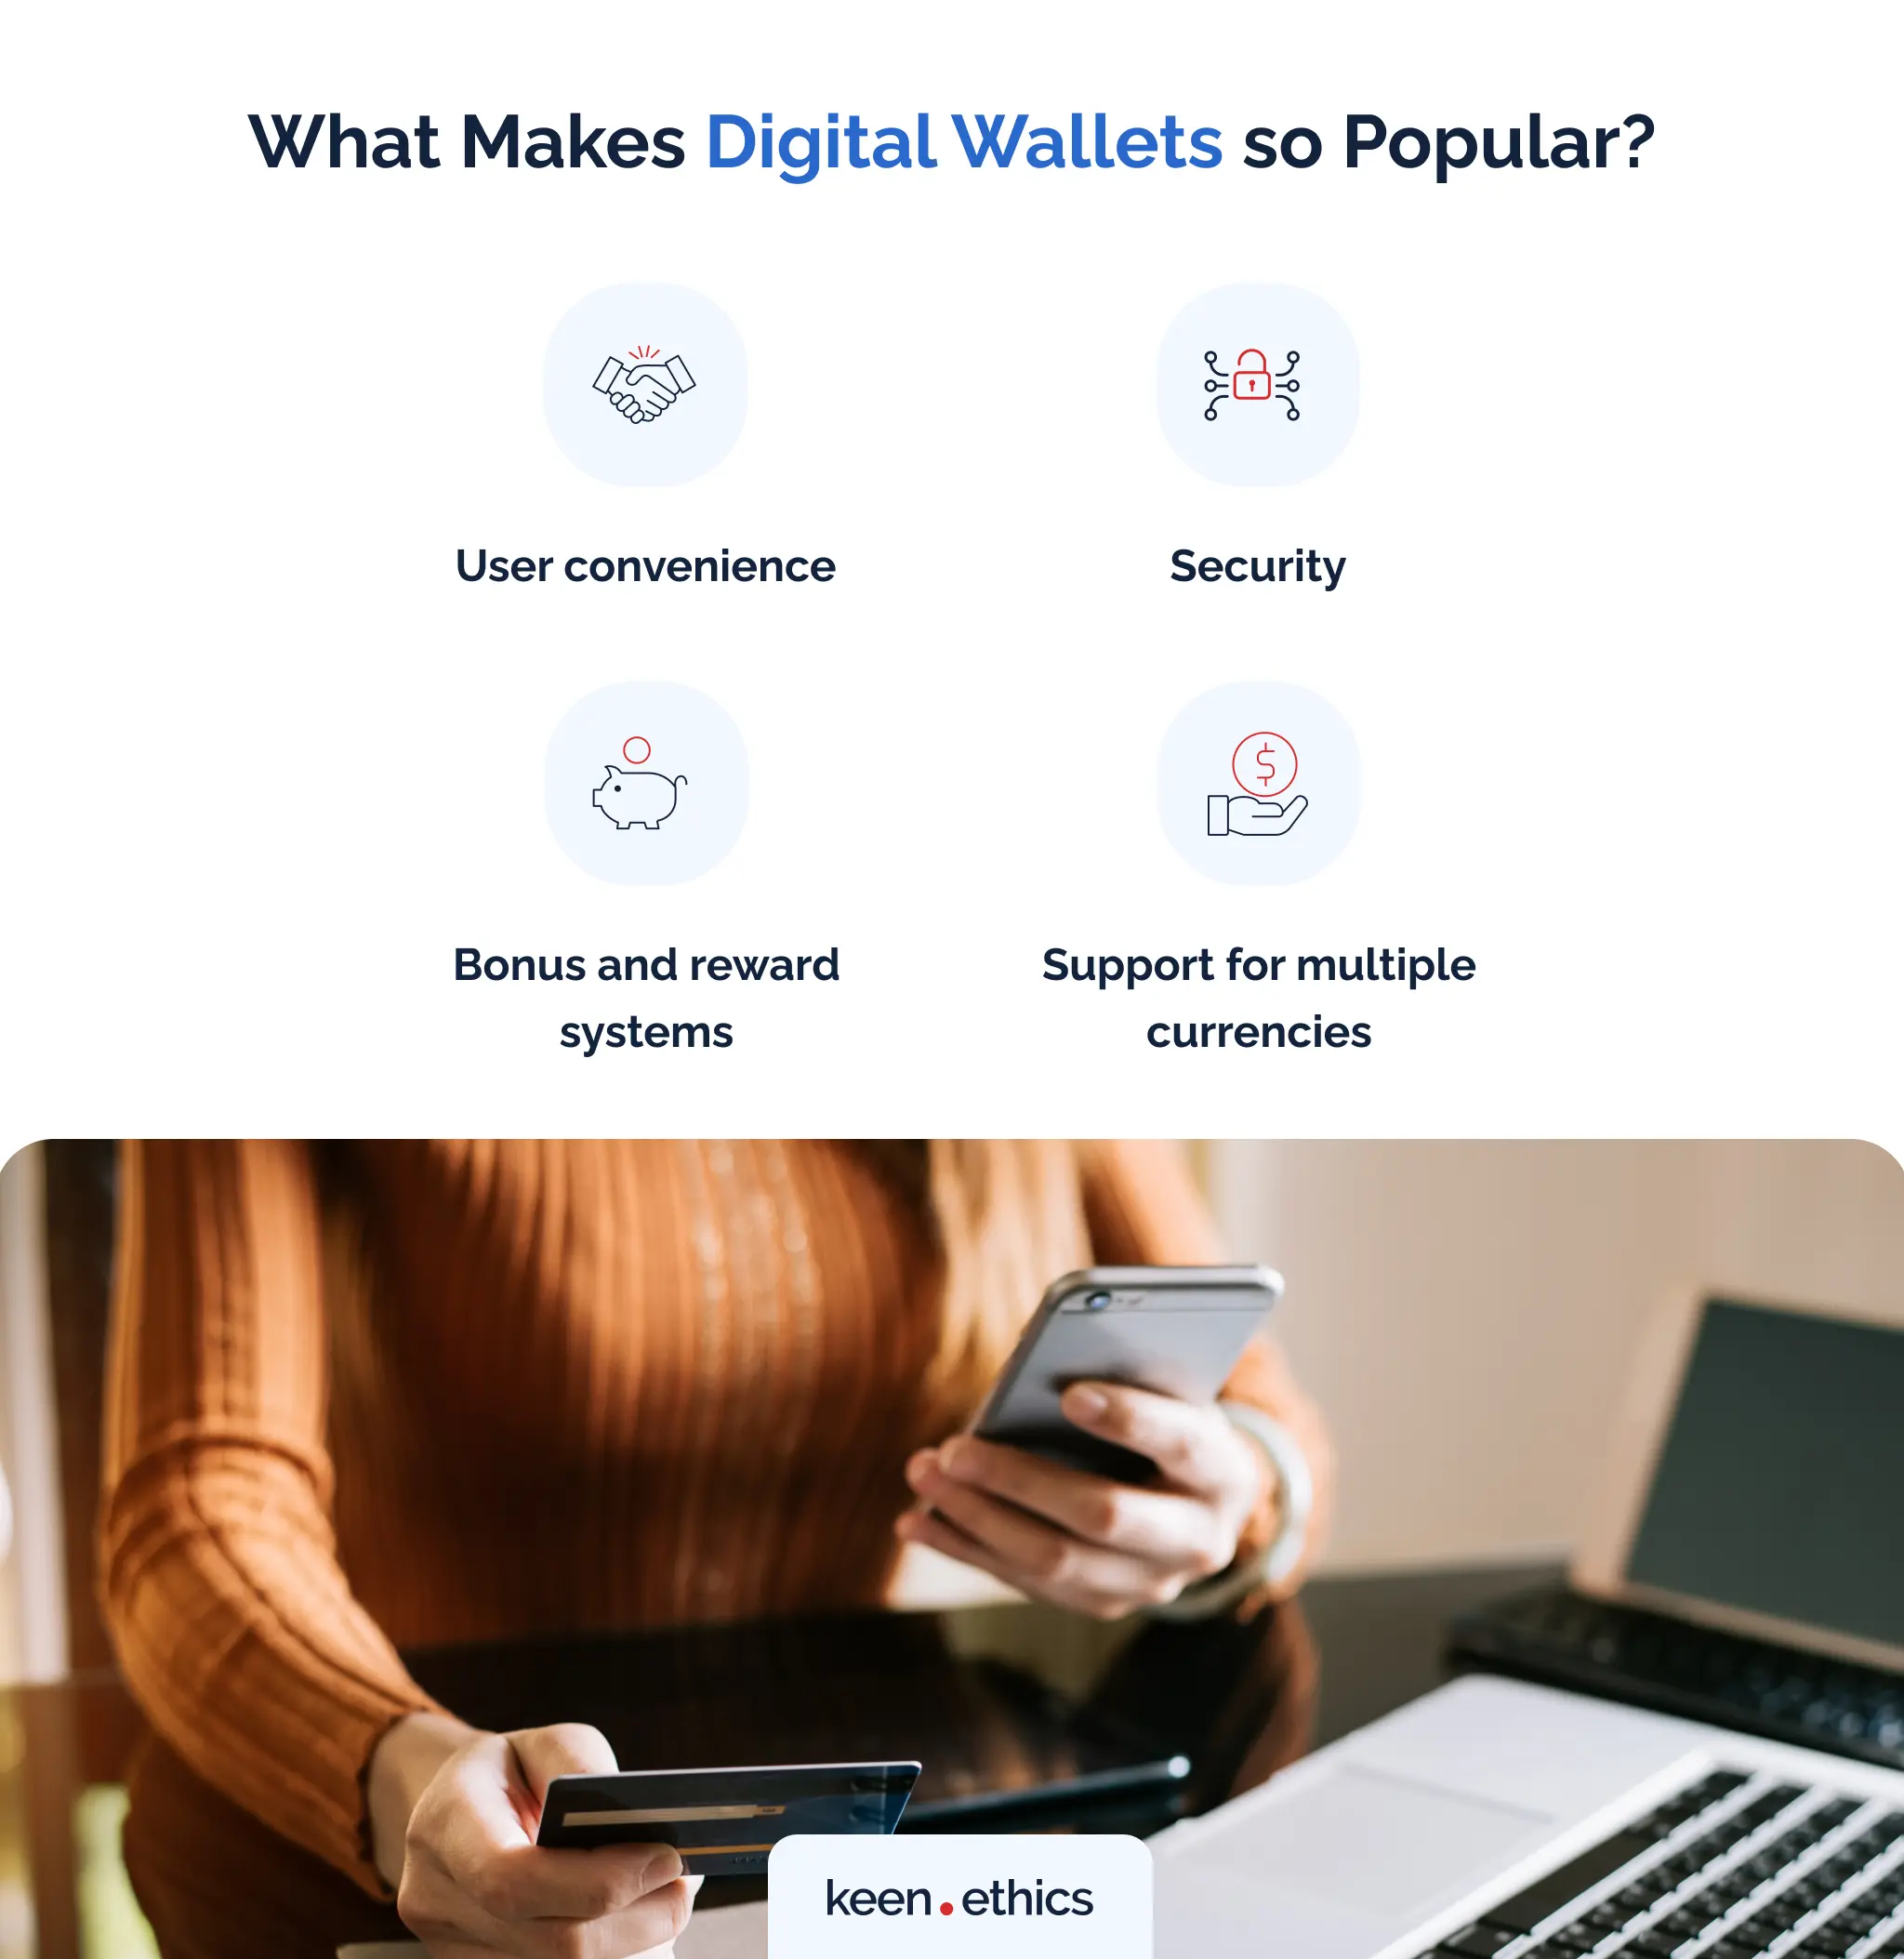 What makes digital wallets so popular?